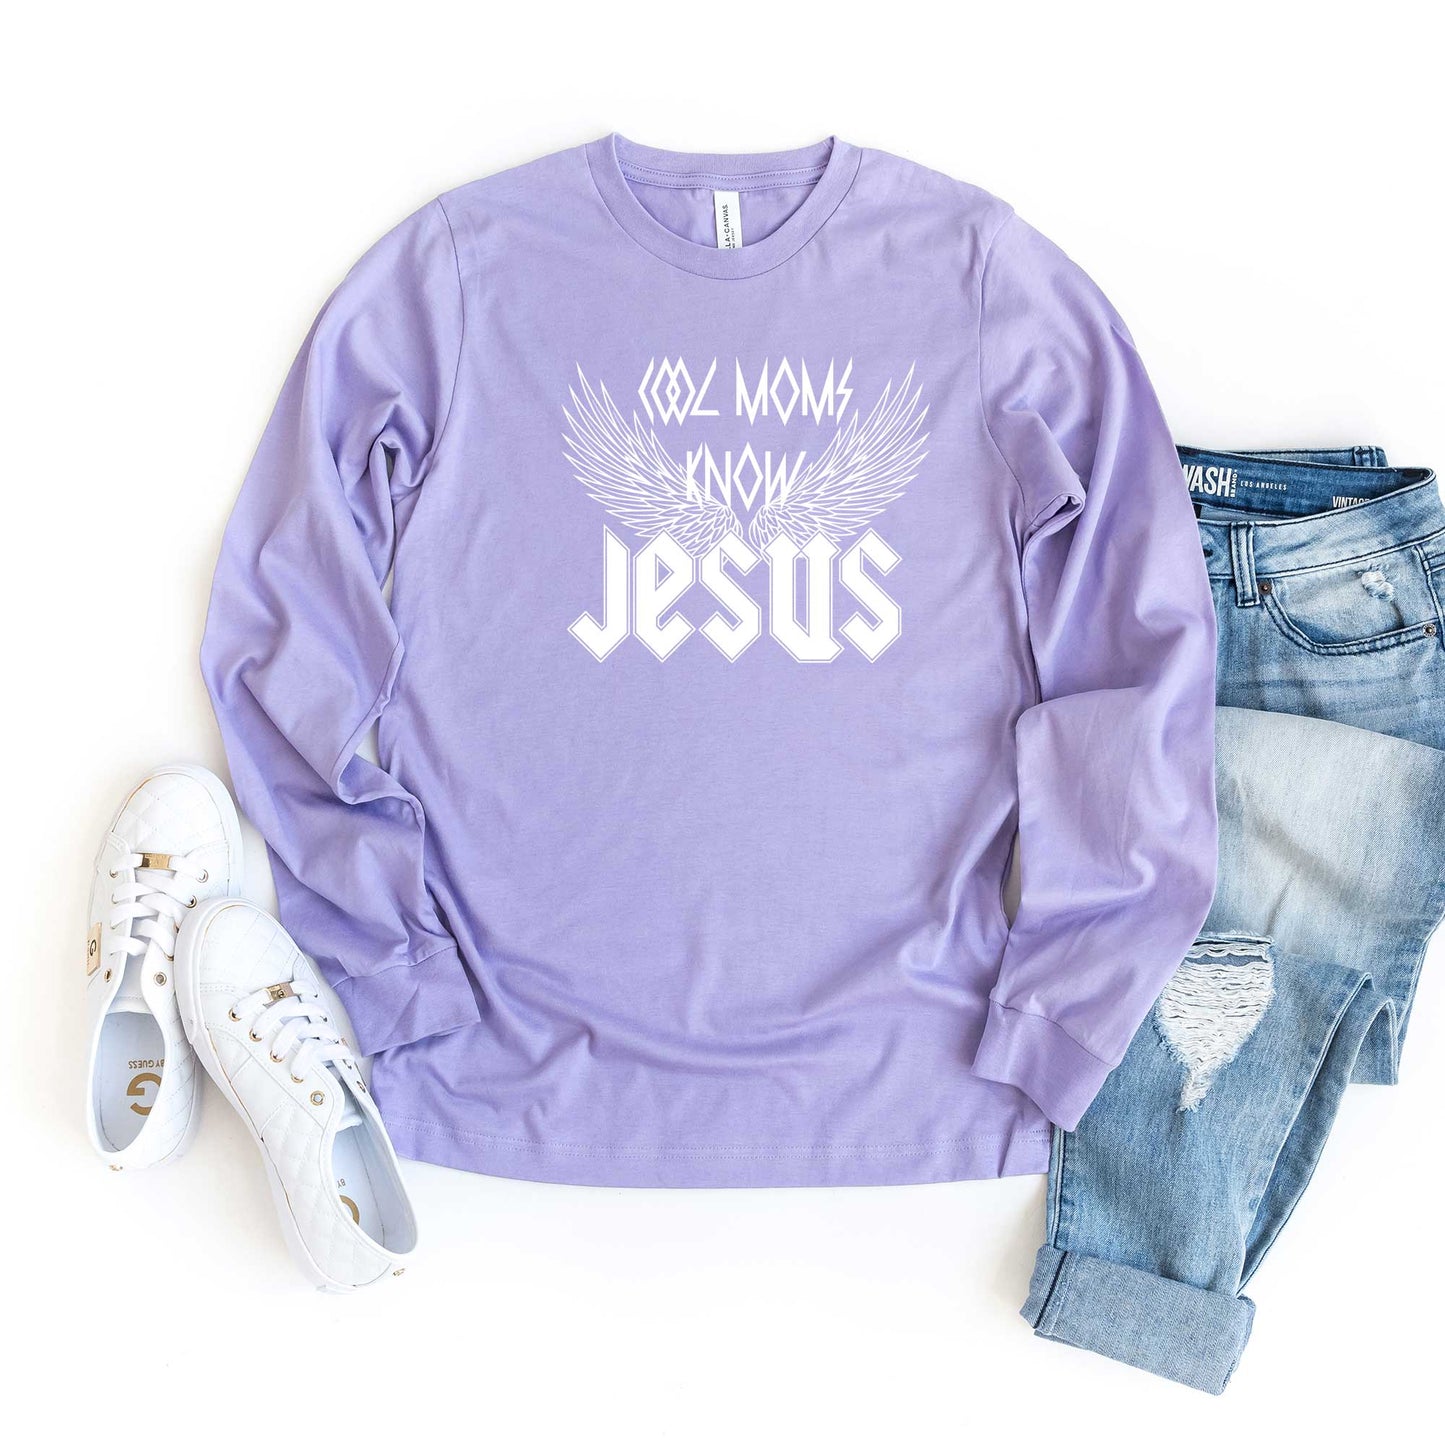 Cool Mom Know Jesus Wings | Long Sleeve Crew Neck